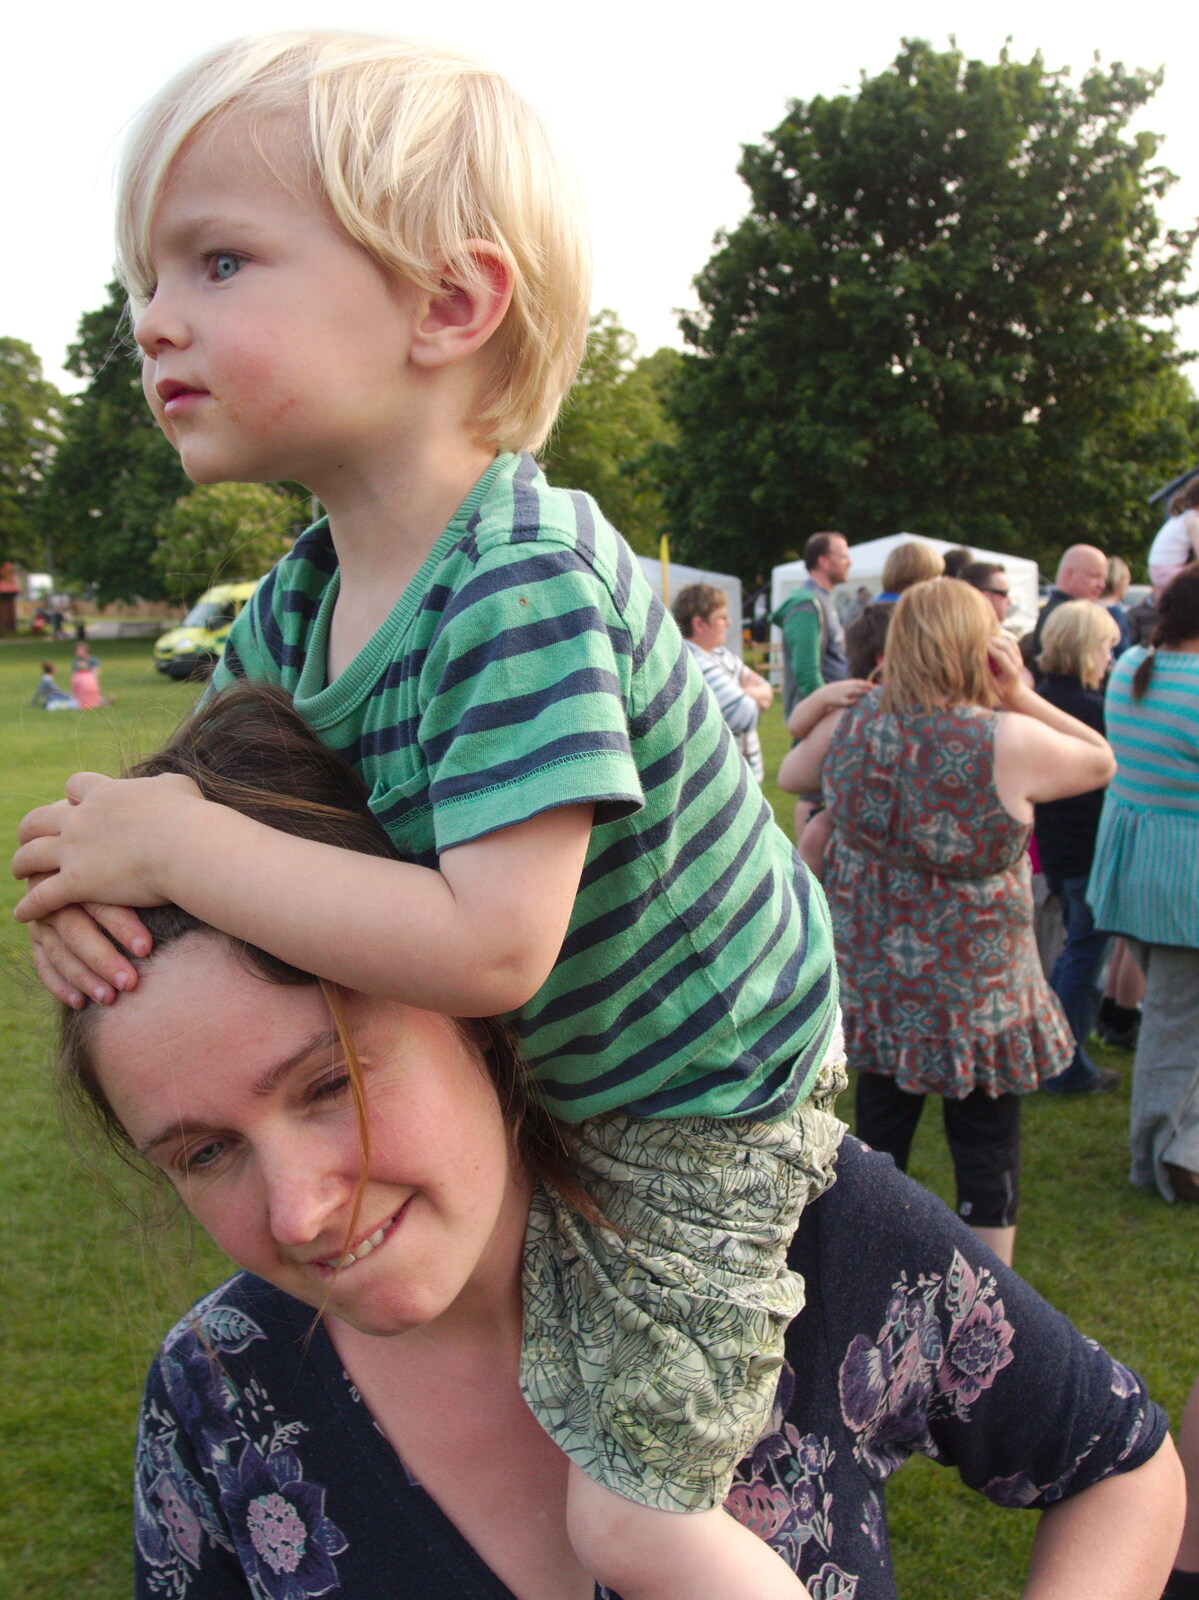 Harry gets a piggyback from A Family Fun Day on the Park, Diss, Norfolk - 16th May 2014